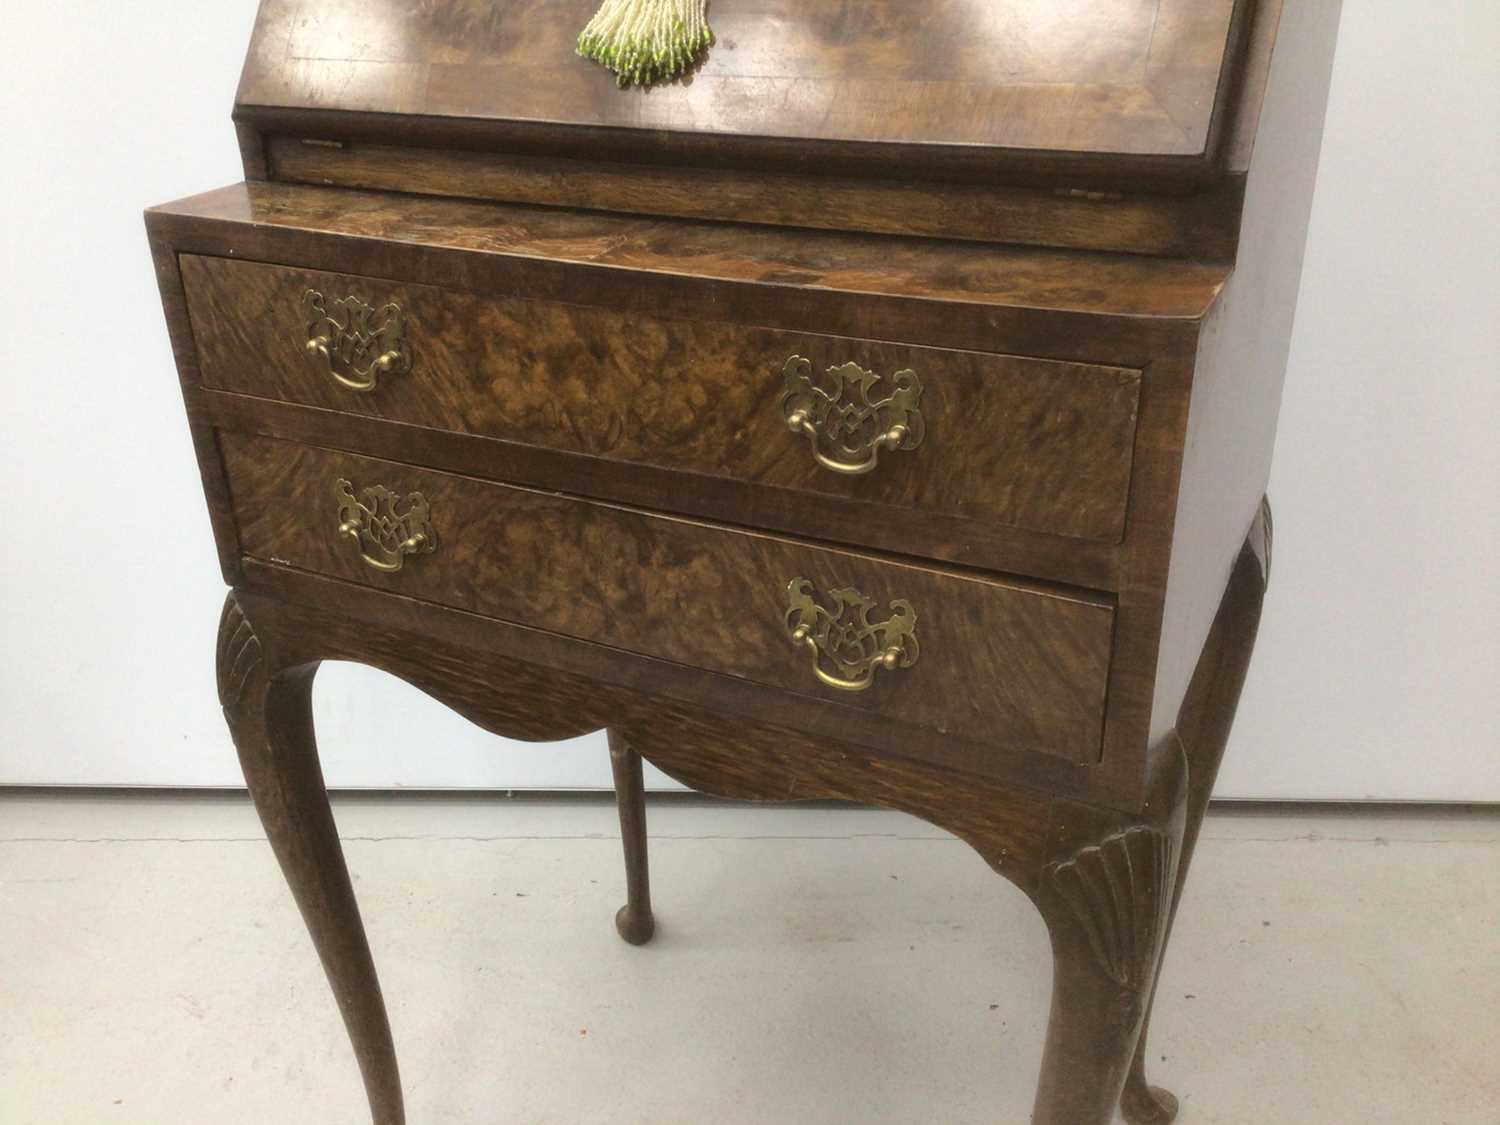 Good quality Georgian style ladies bureau with two drawers below on cabriole legs, 51cm wide x 38cm - Image 2 of 4